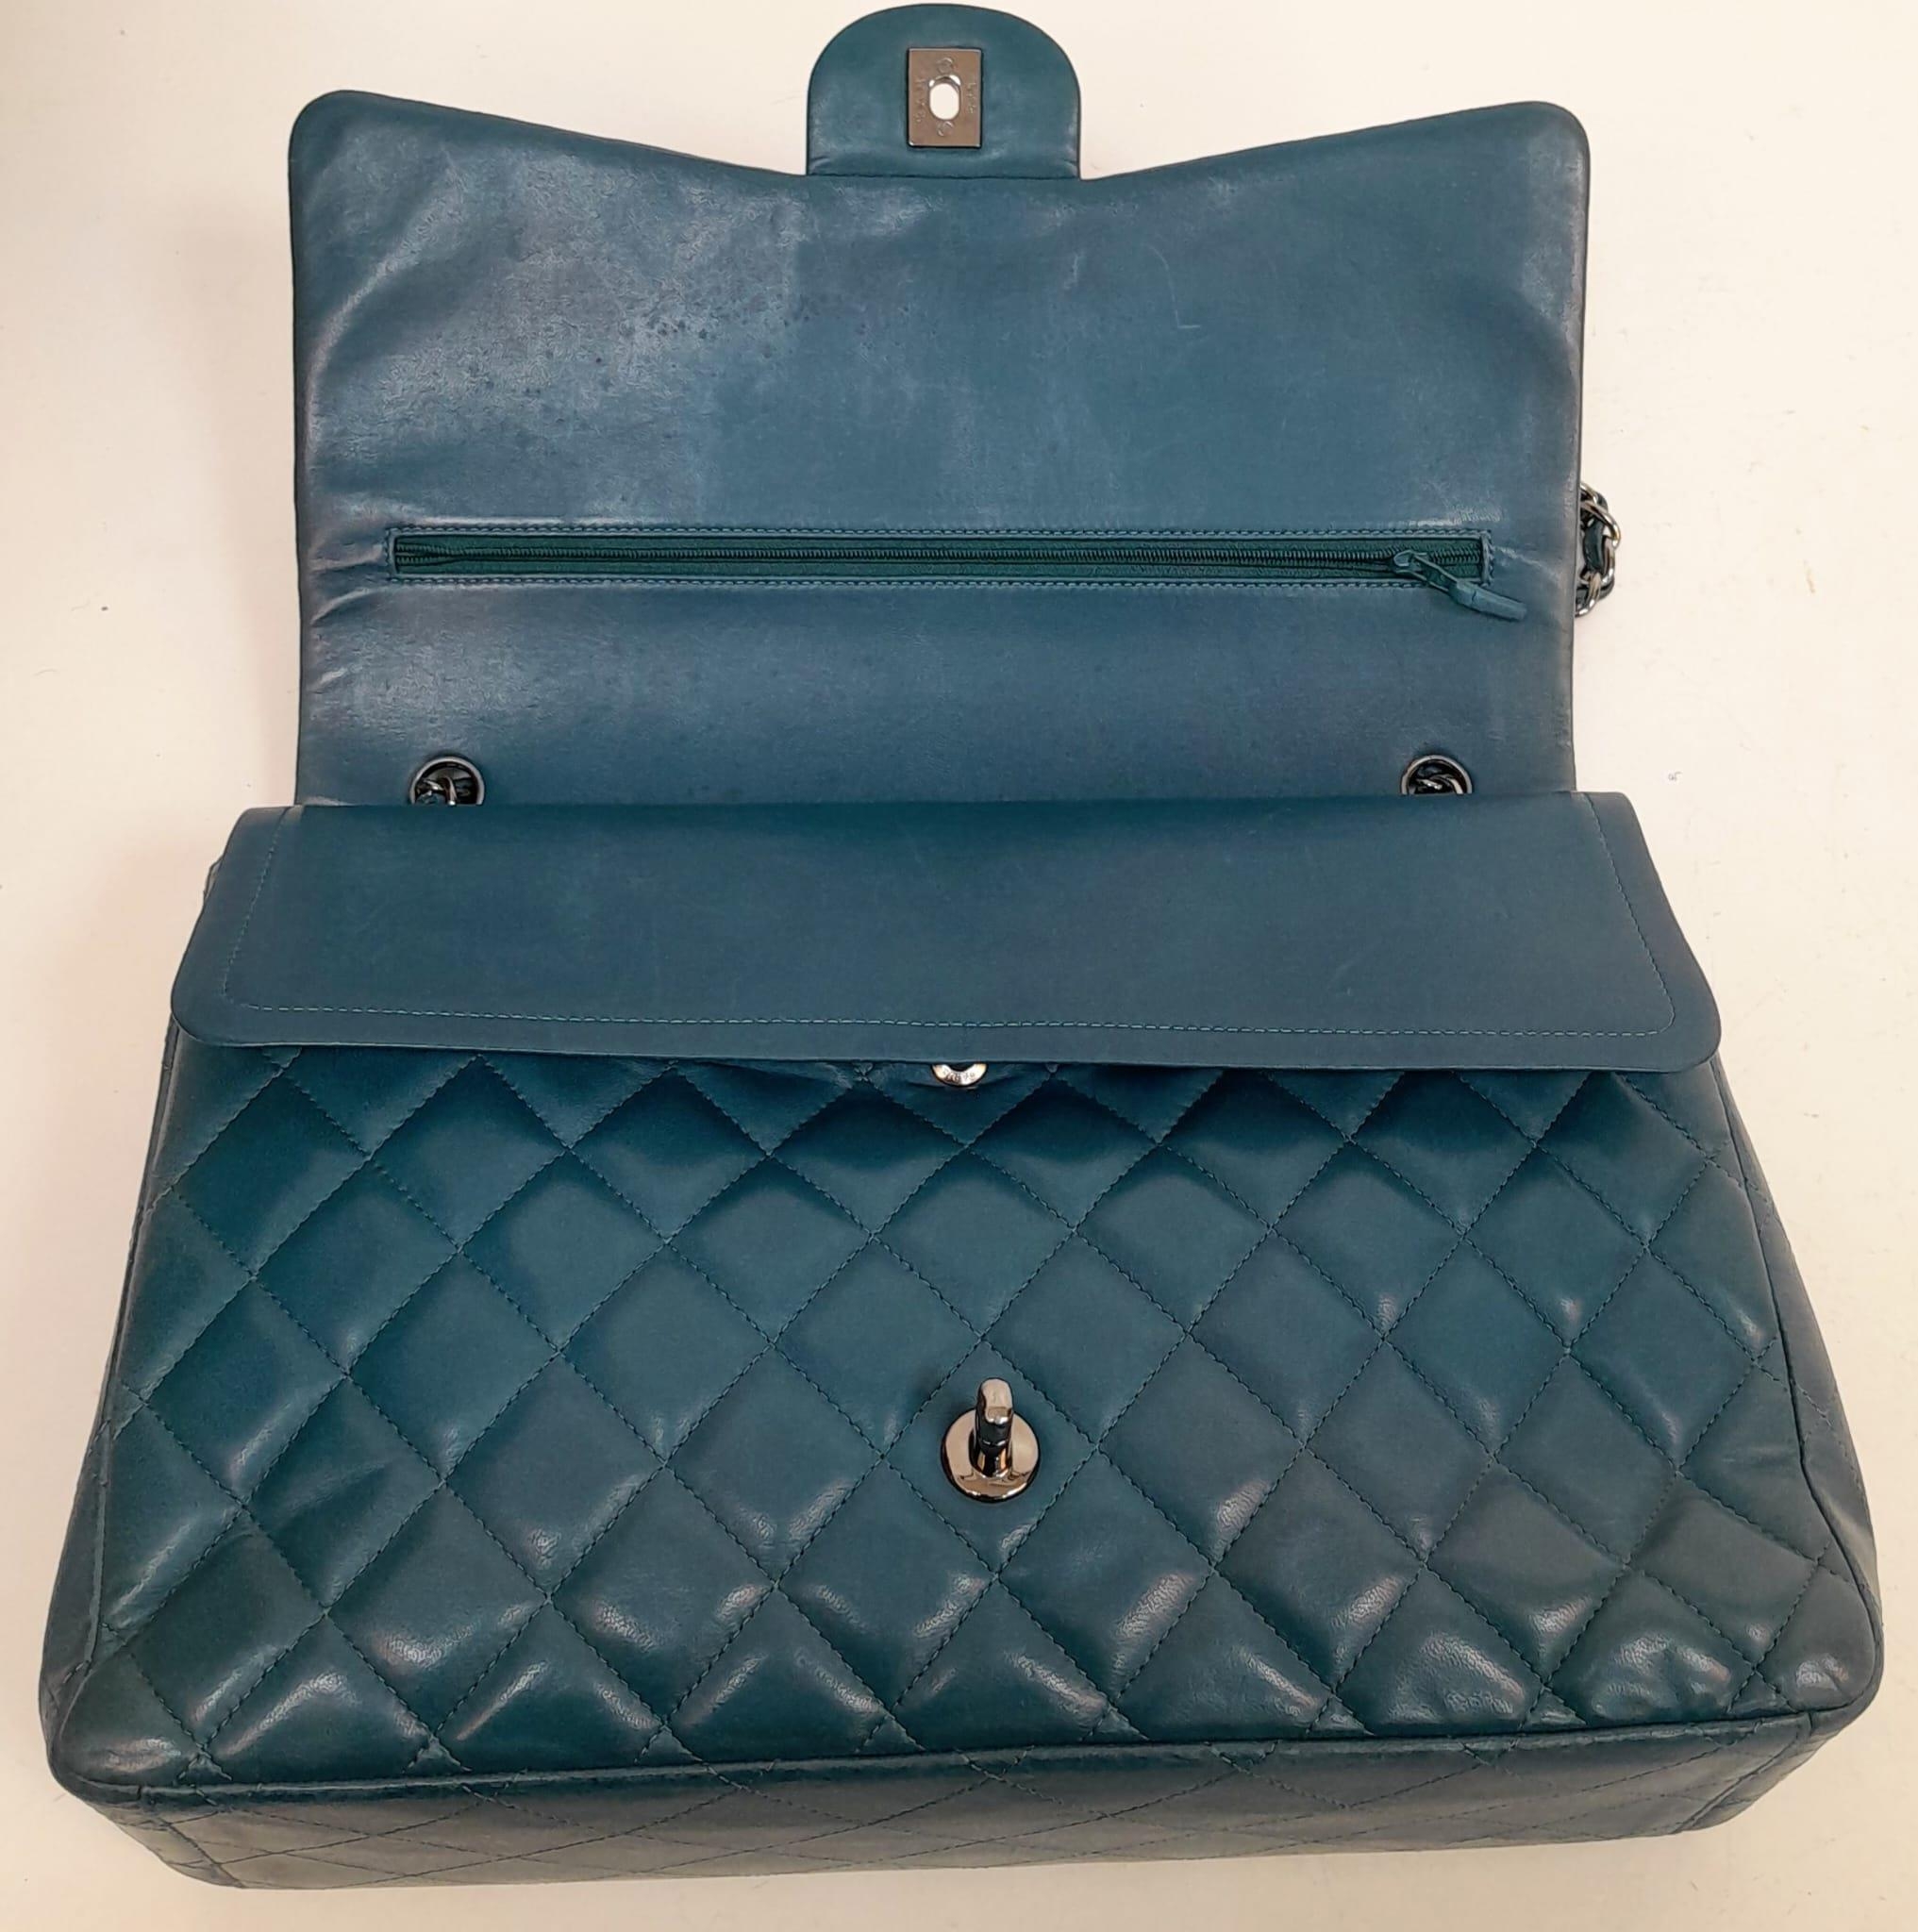 A Chanel Teal Jumbo Classic Double Flap Bag. Quilted leather exterior with silver-toned hardware, - Image 13 of 14